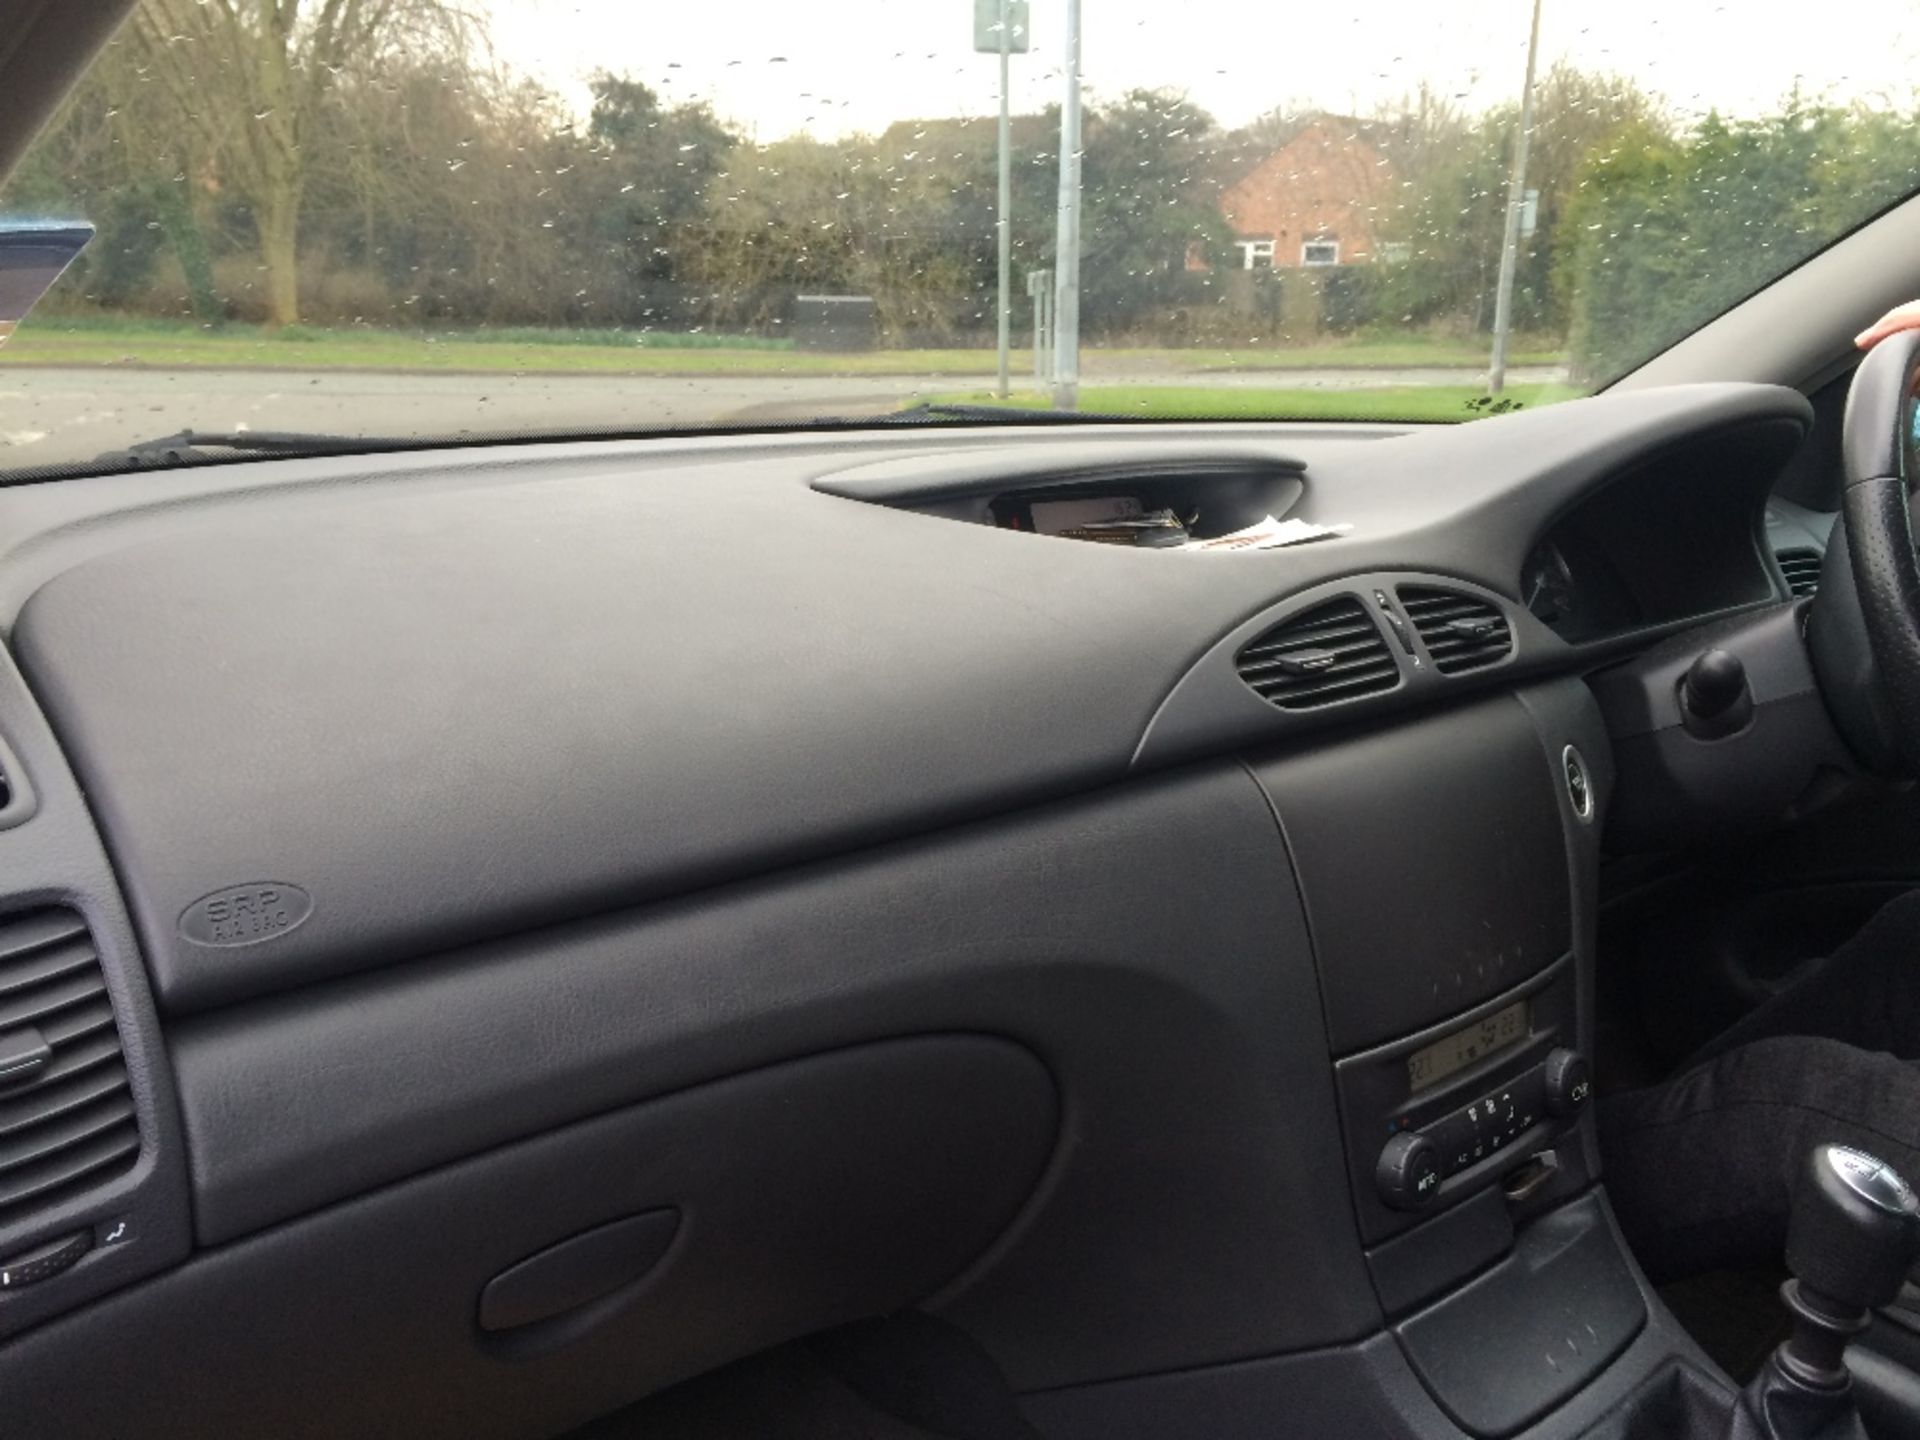 Renault Laguna 04 Reg Leather Interior Current Mot Until July 2017 Being Used Daily 99K Miles - Image 6 of 9